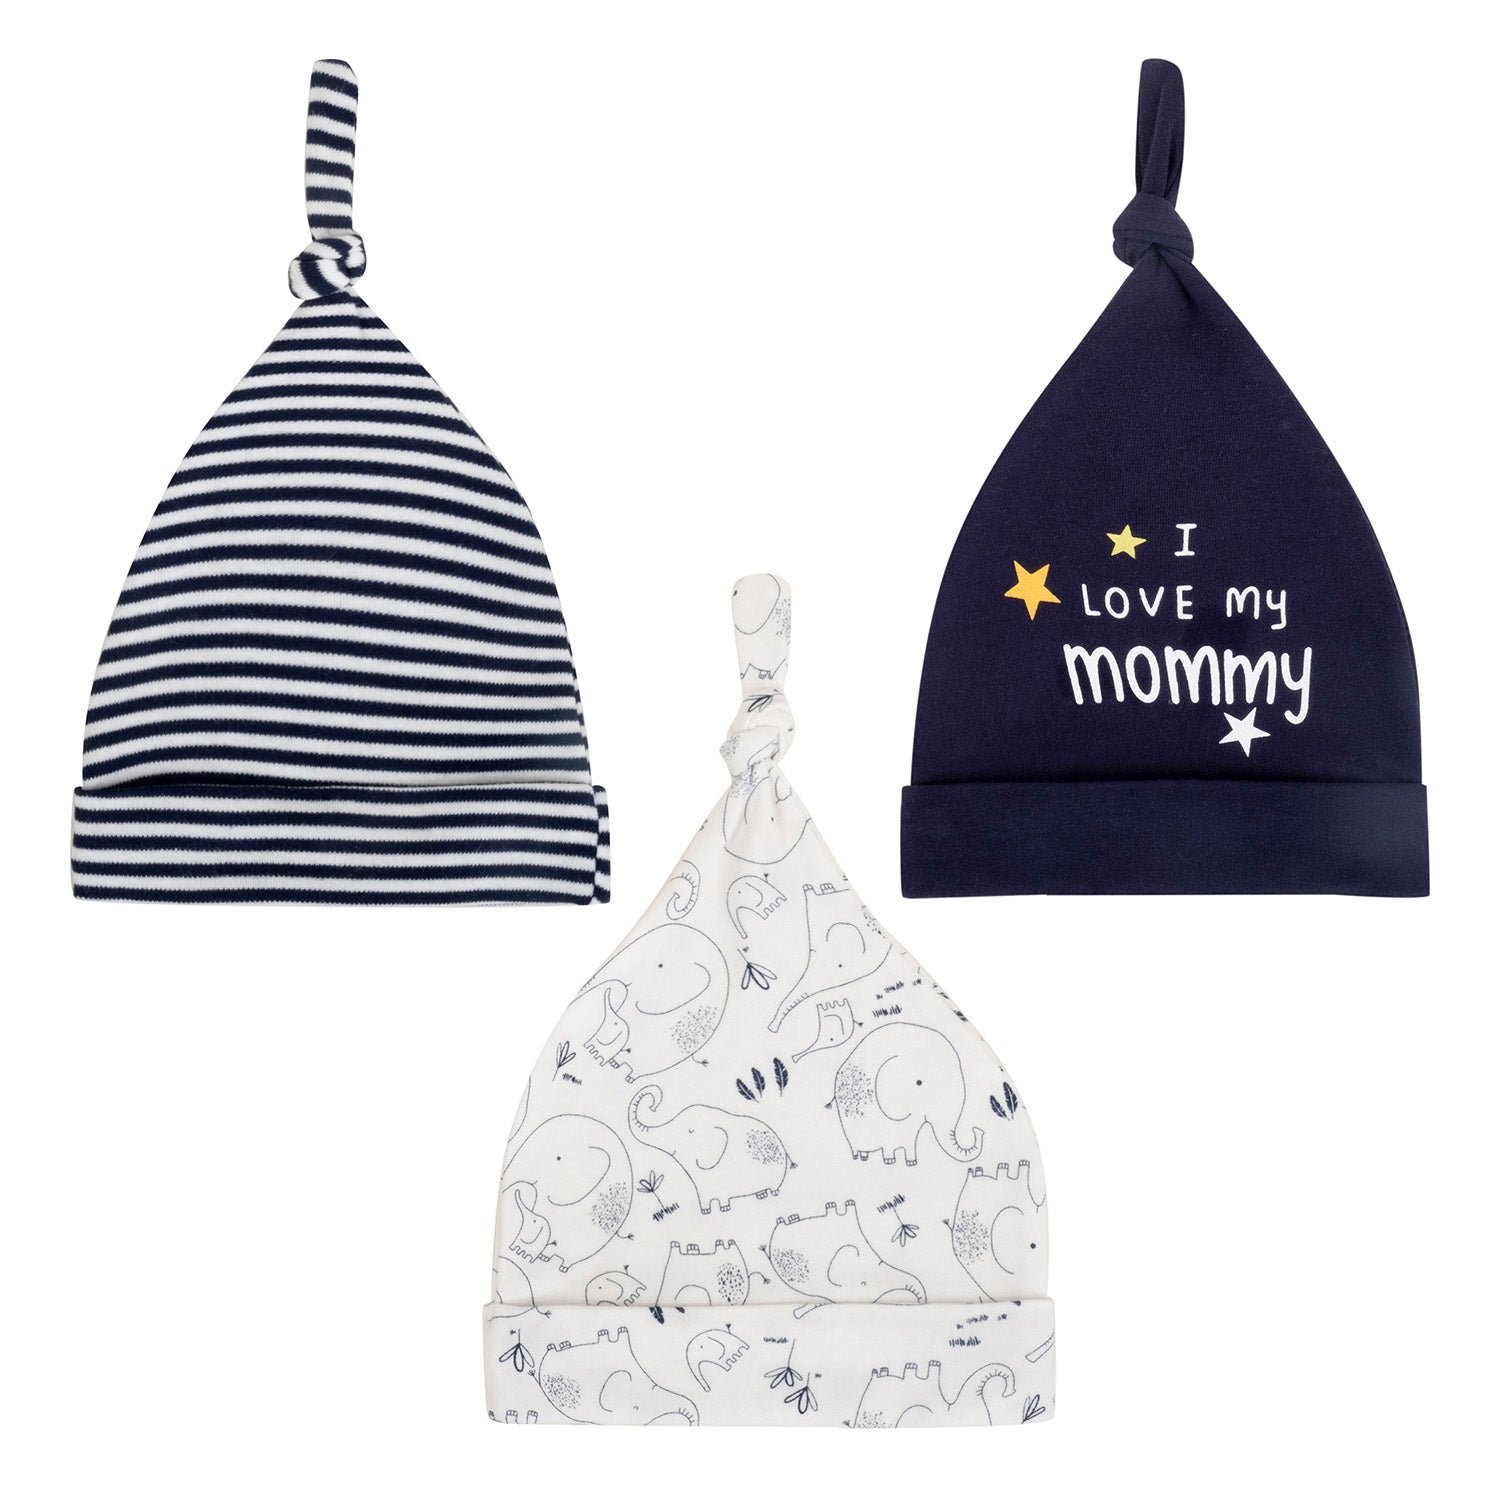 Baby Moo I Love Mom Mummy Knotted Infants Ultra Soft 100% Cotton All Season Pack of 3 Caps - White